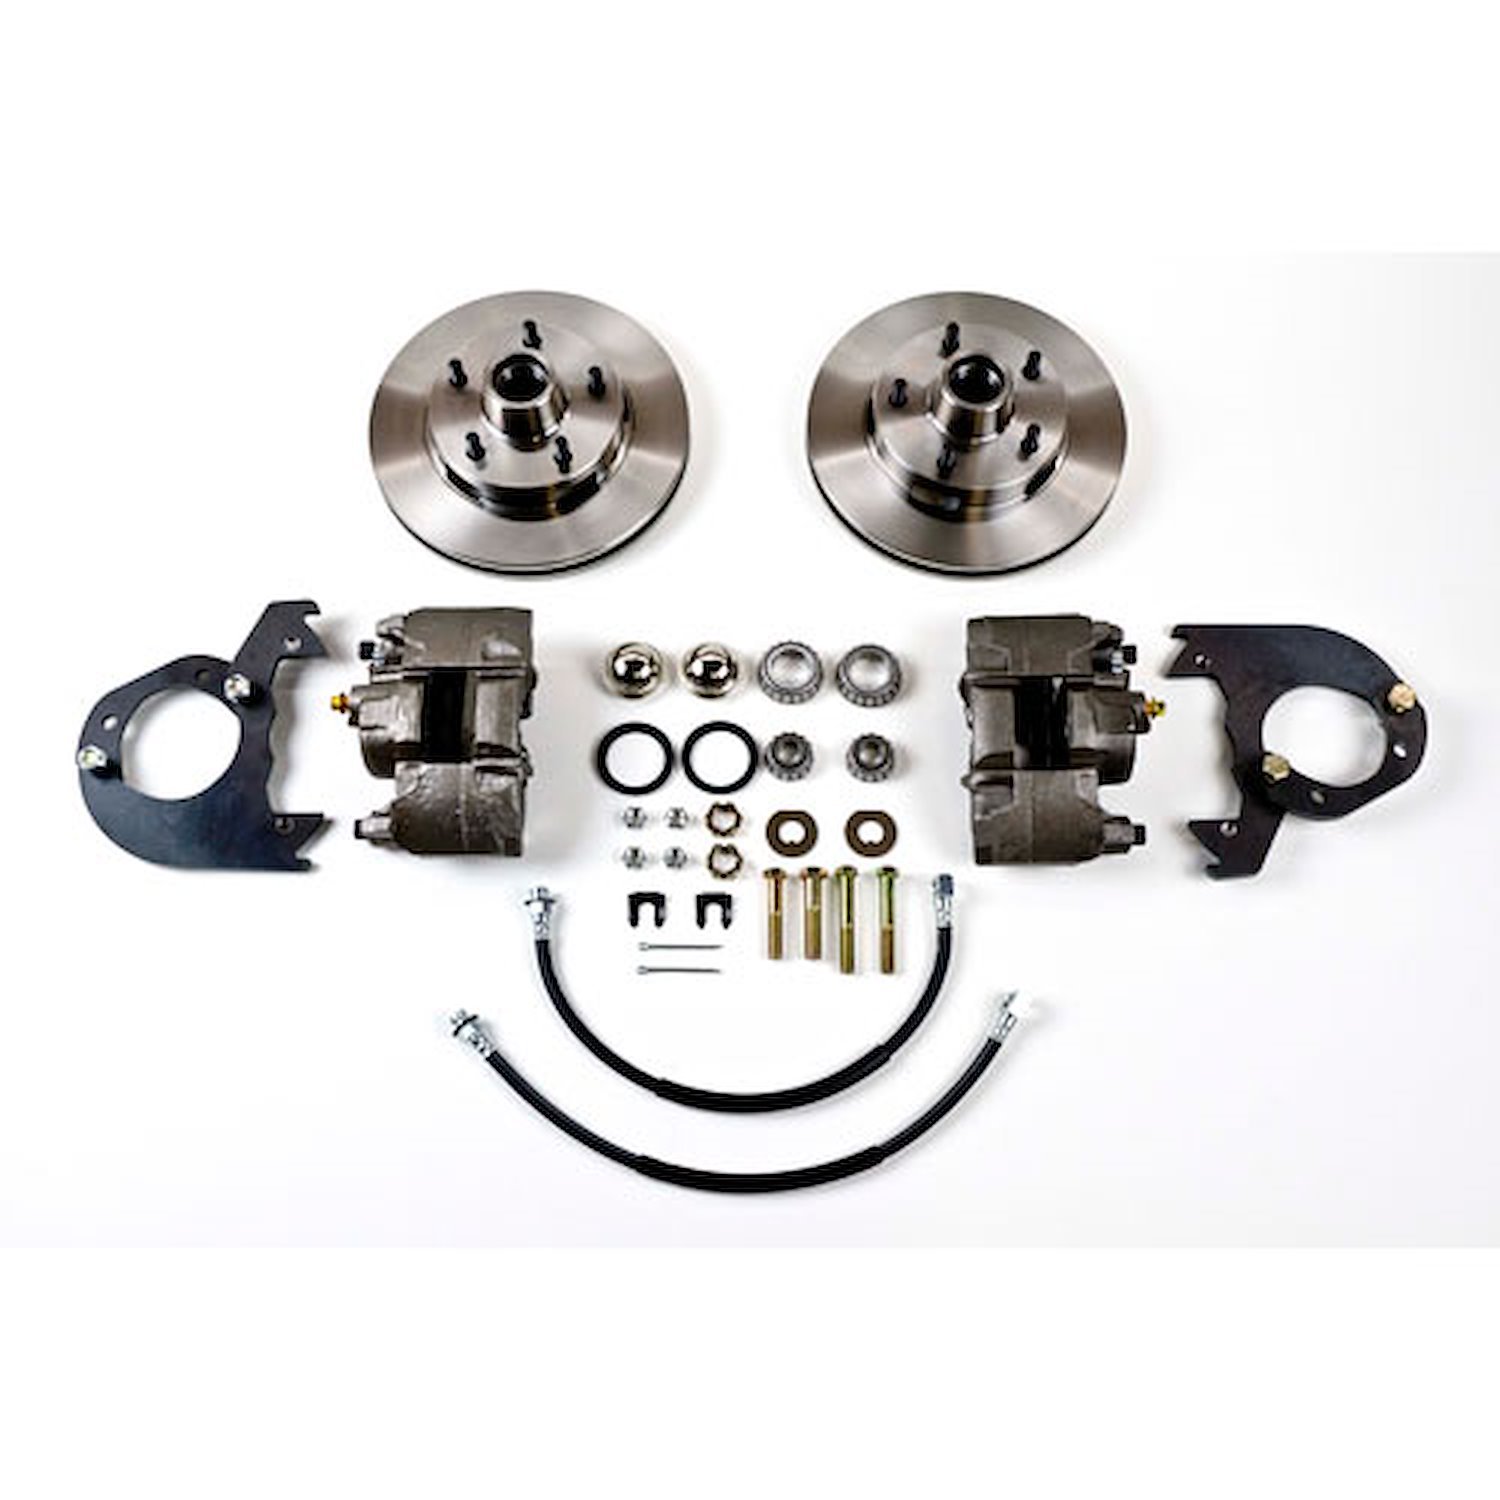 58 - 64 Full size Chevy 14" Power Disc Conversion Kit (Master Cylinder Lines, Booster Master Cylinder Valve Kit Invoiced Below)